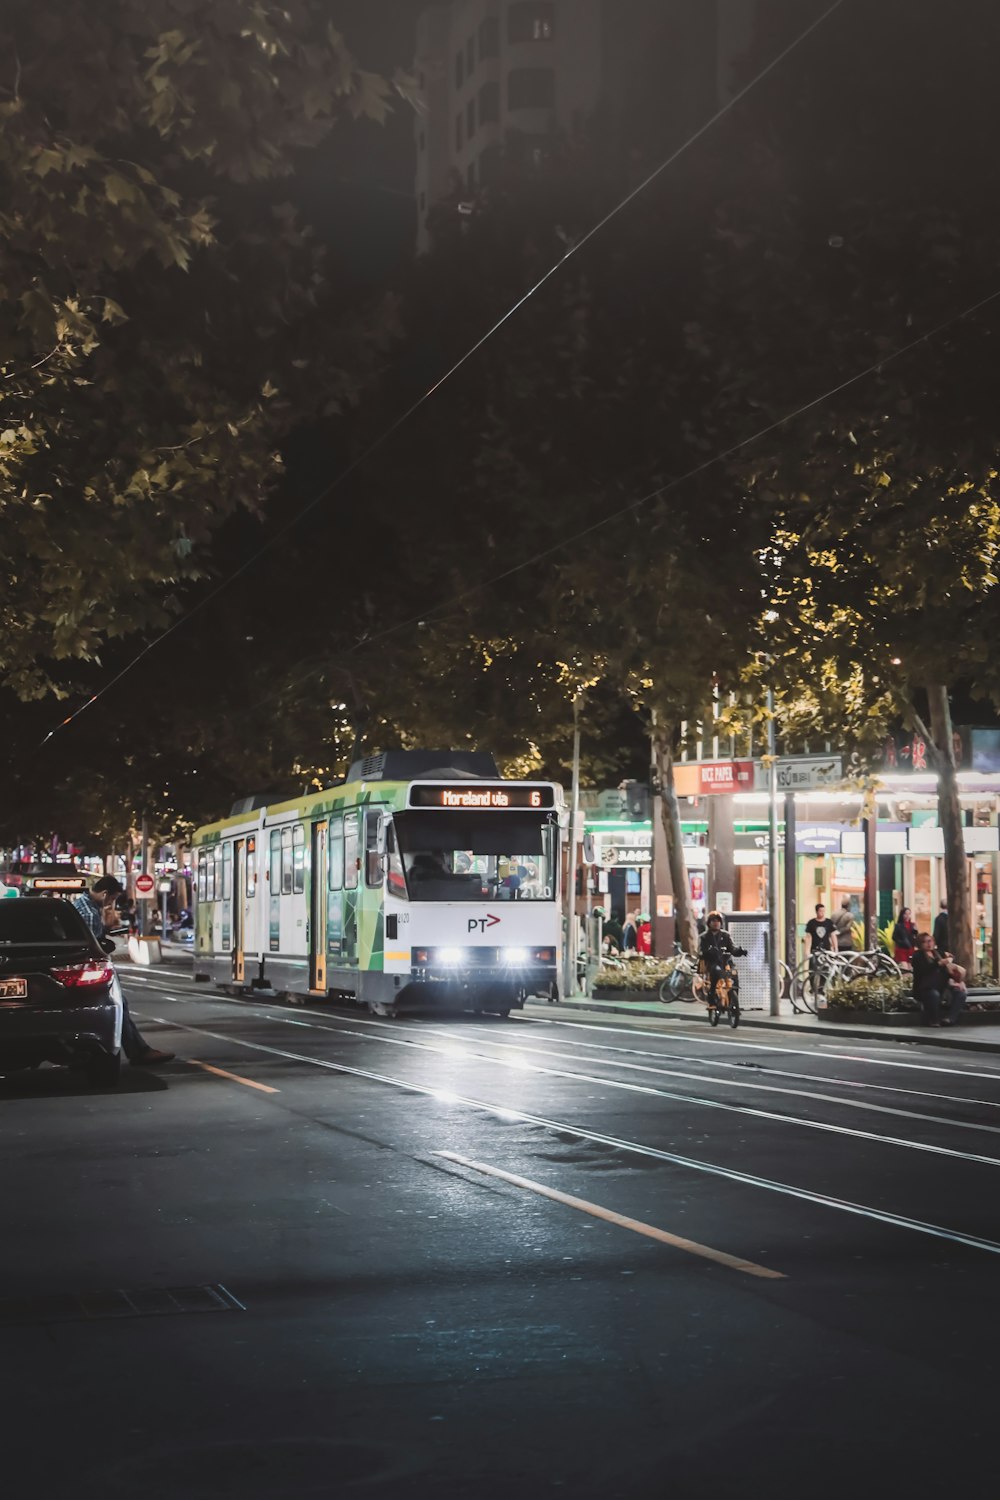 white and green train on city street during night time